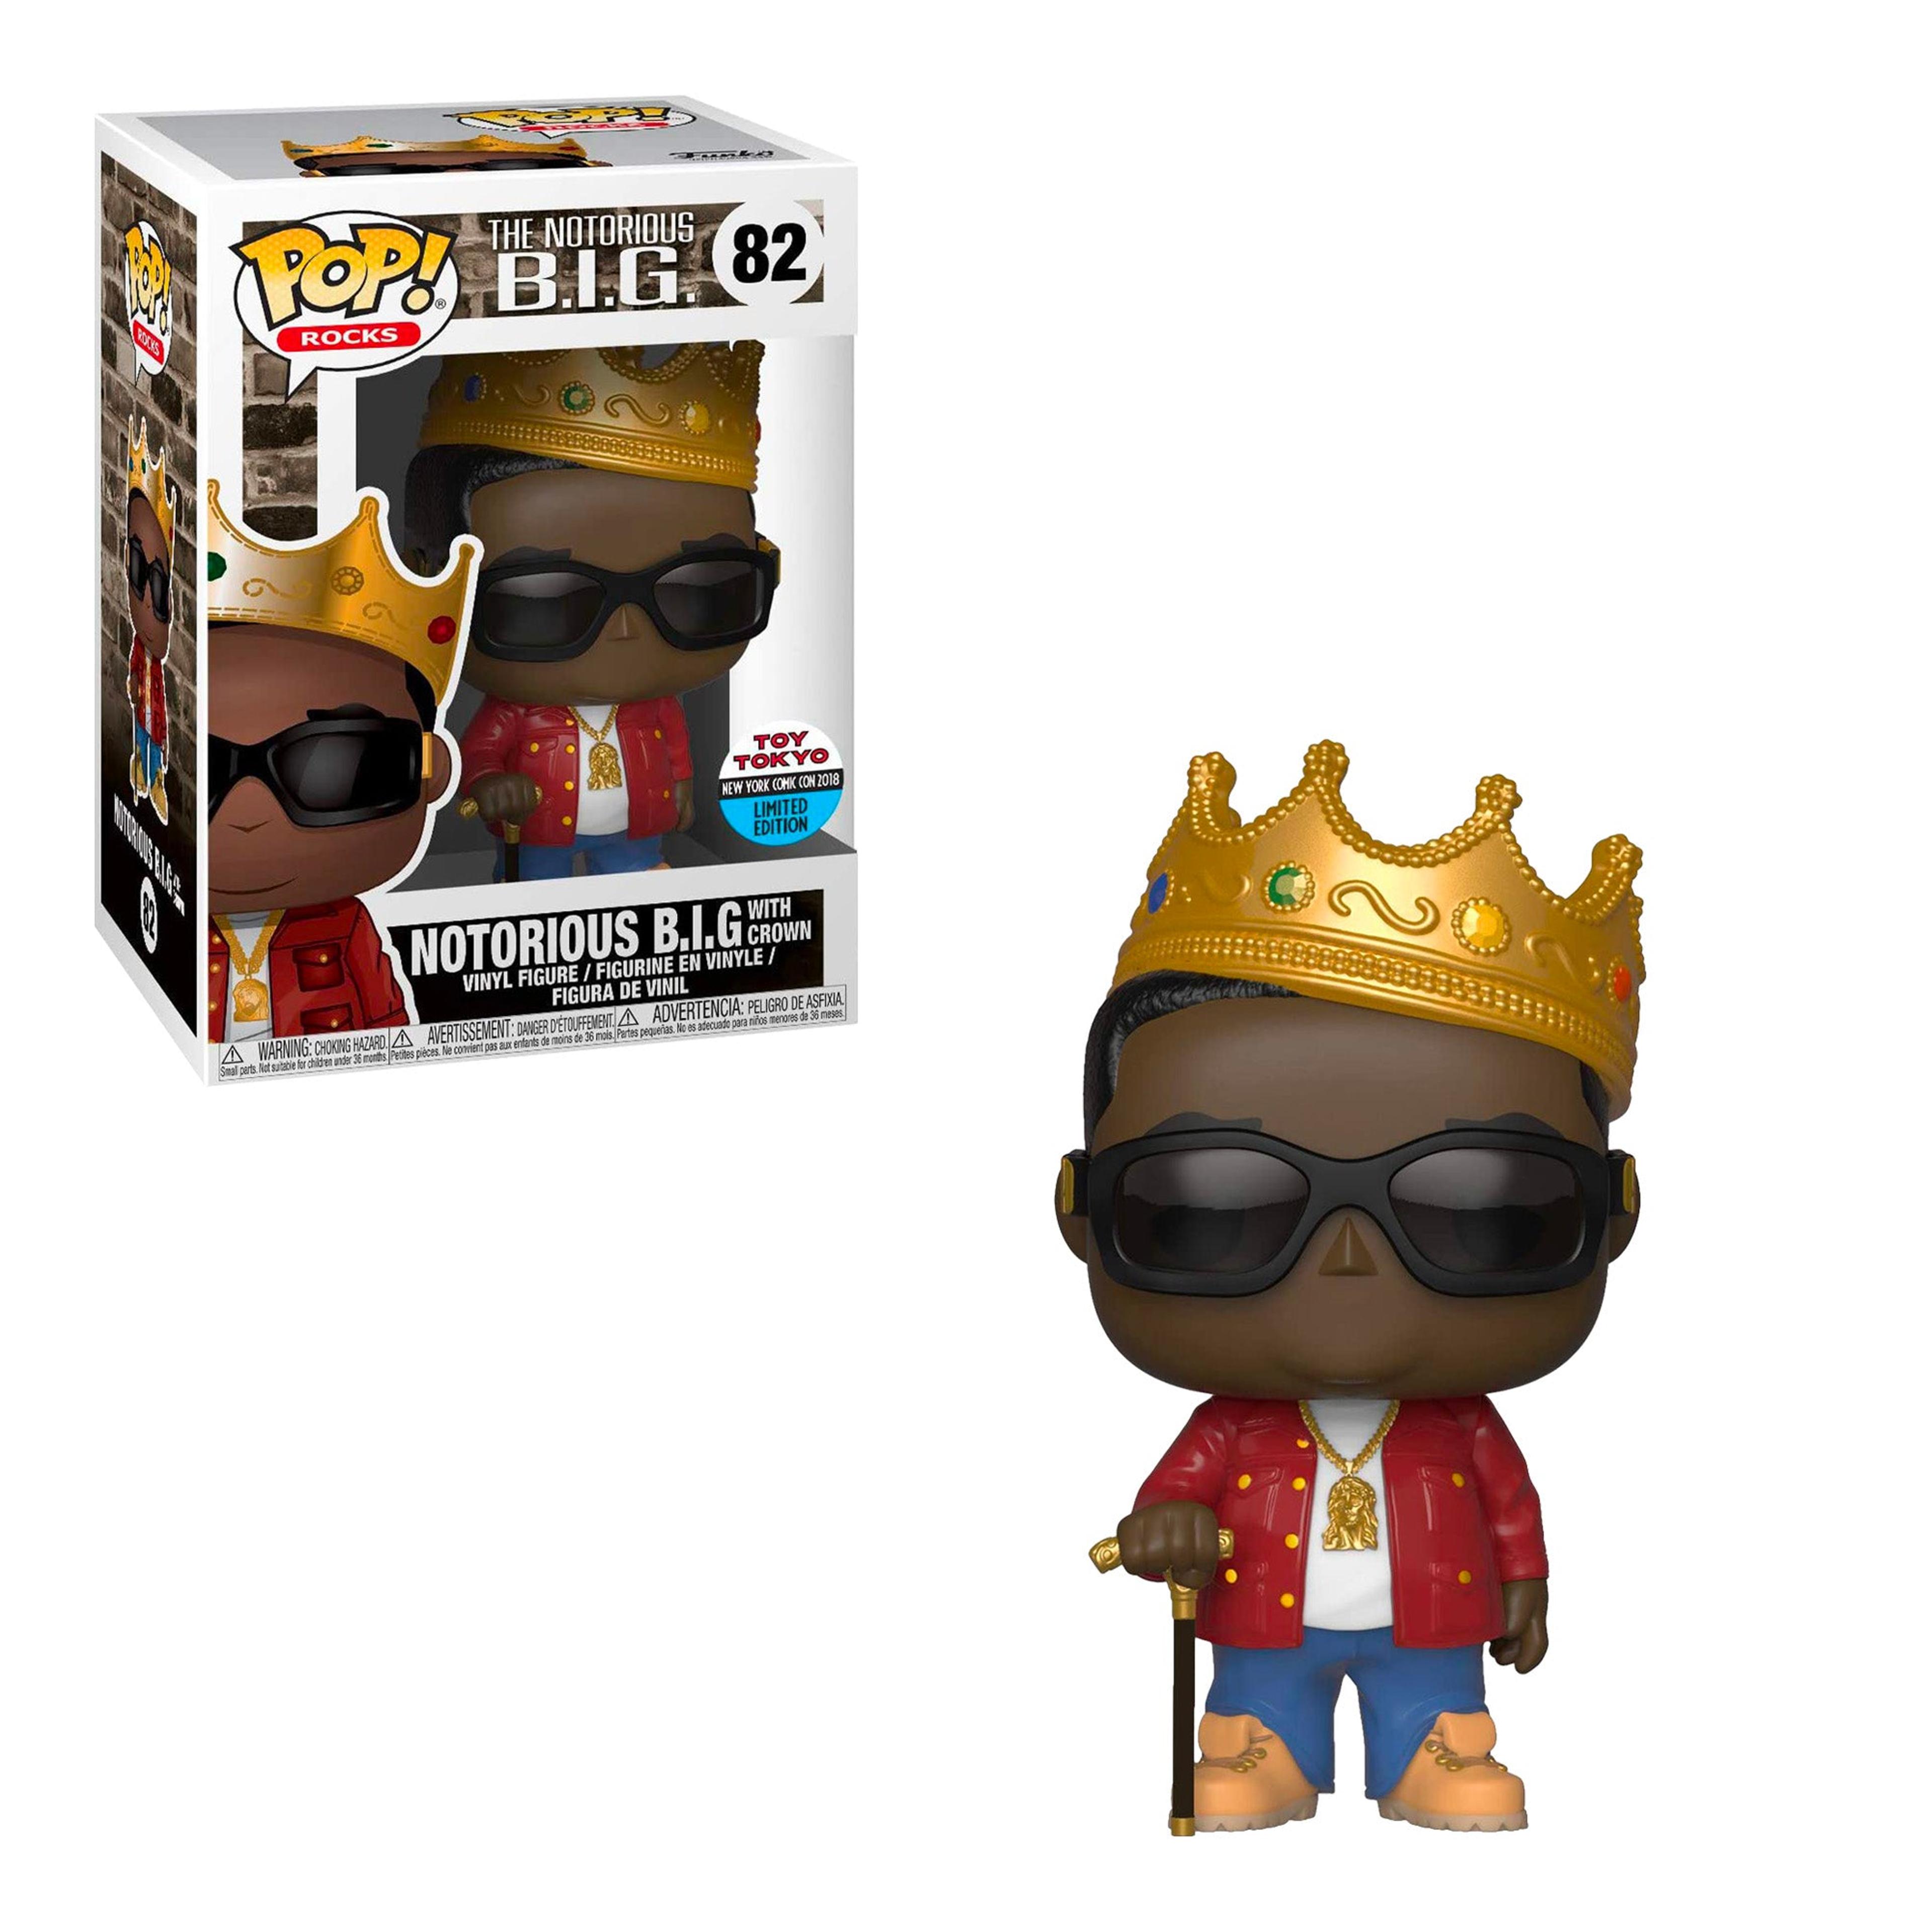 Funko Pop! Rocks: The Notorious B.I.G. #82 with Crown NYCC 2018 